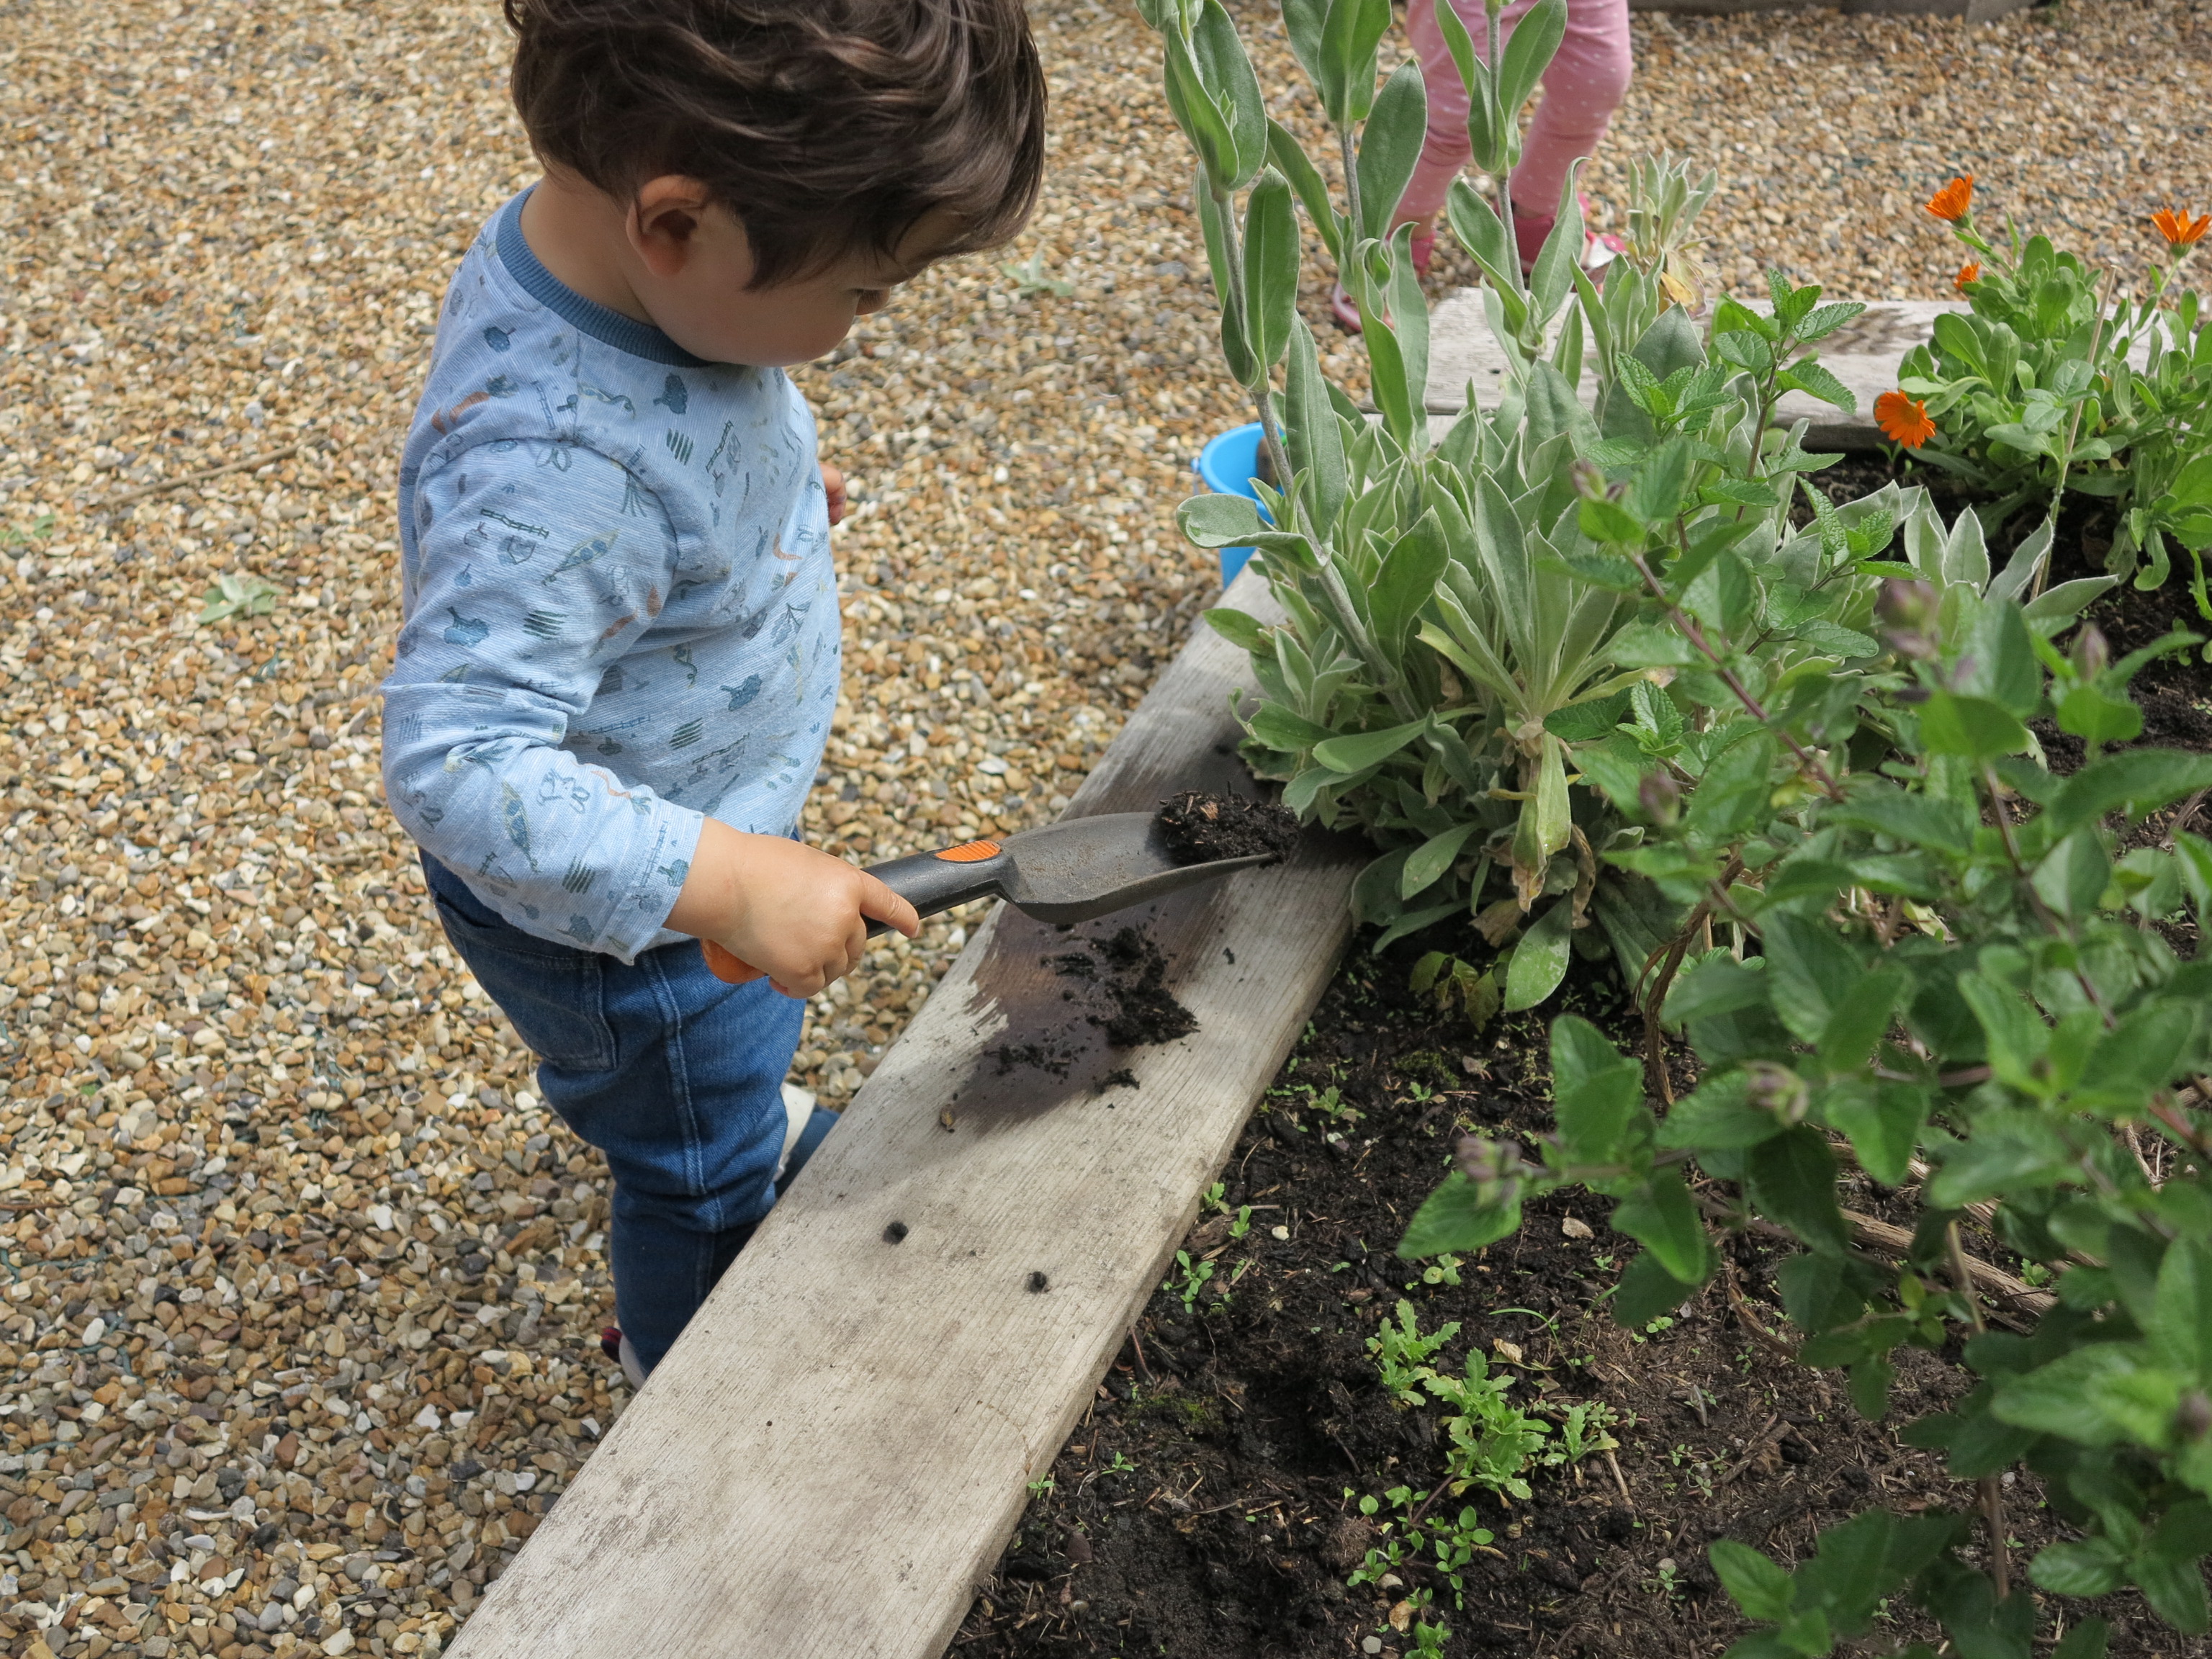 A photograph of a child digging into a flower bed.